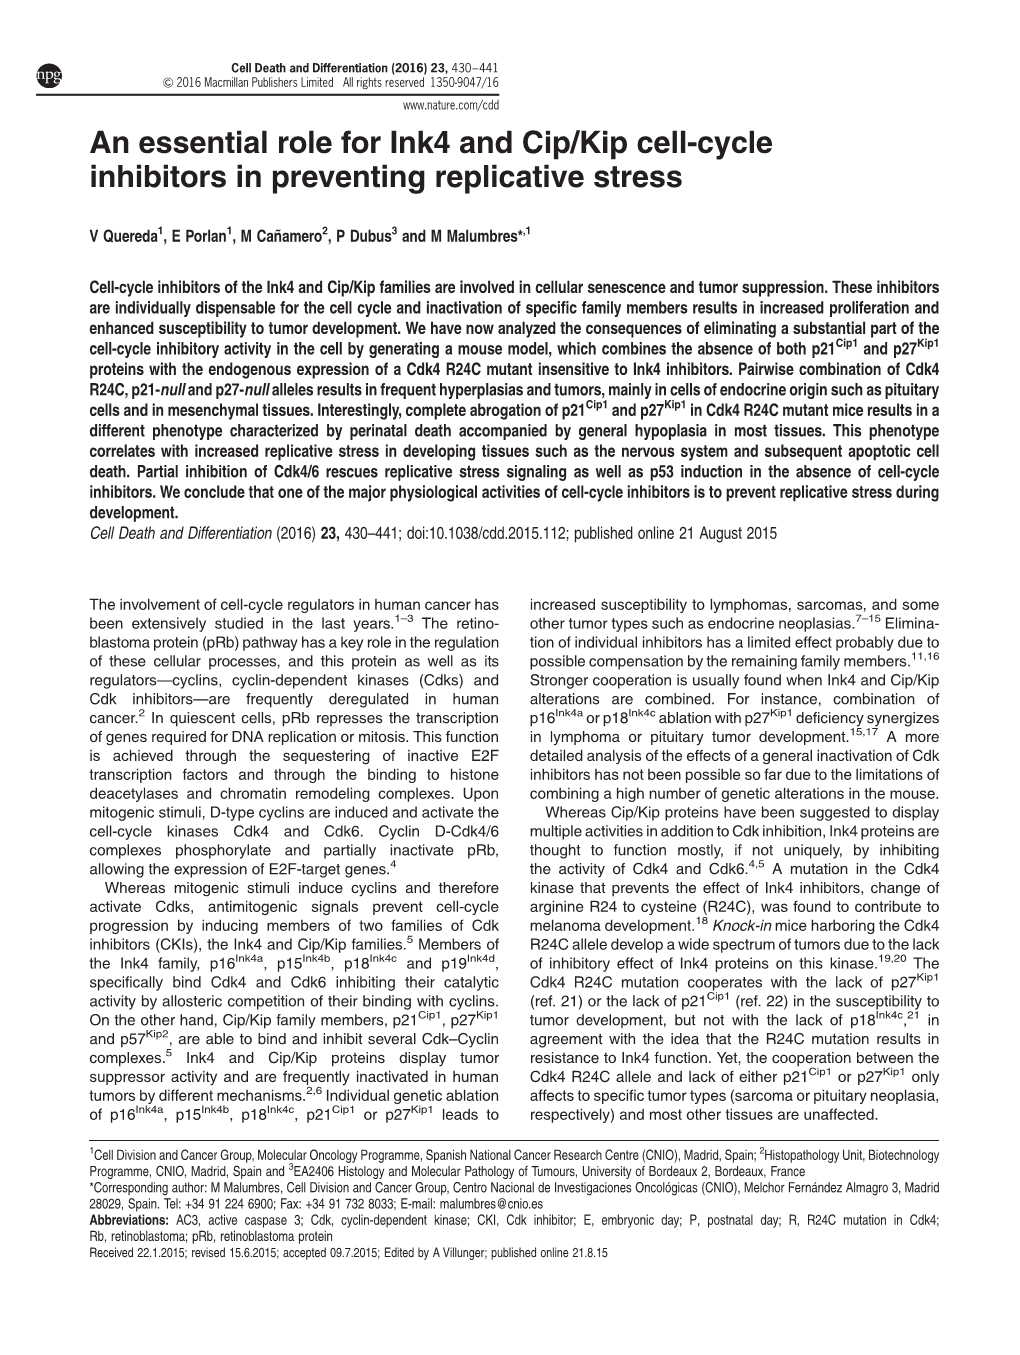 Kip Cell-Cycle Inhibitors in Preventing Replicative Stress